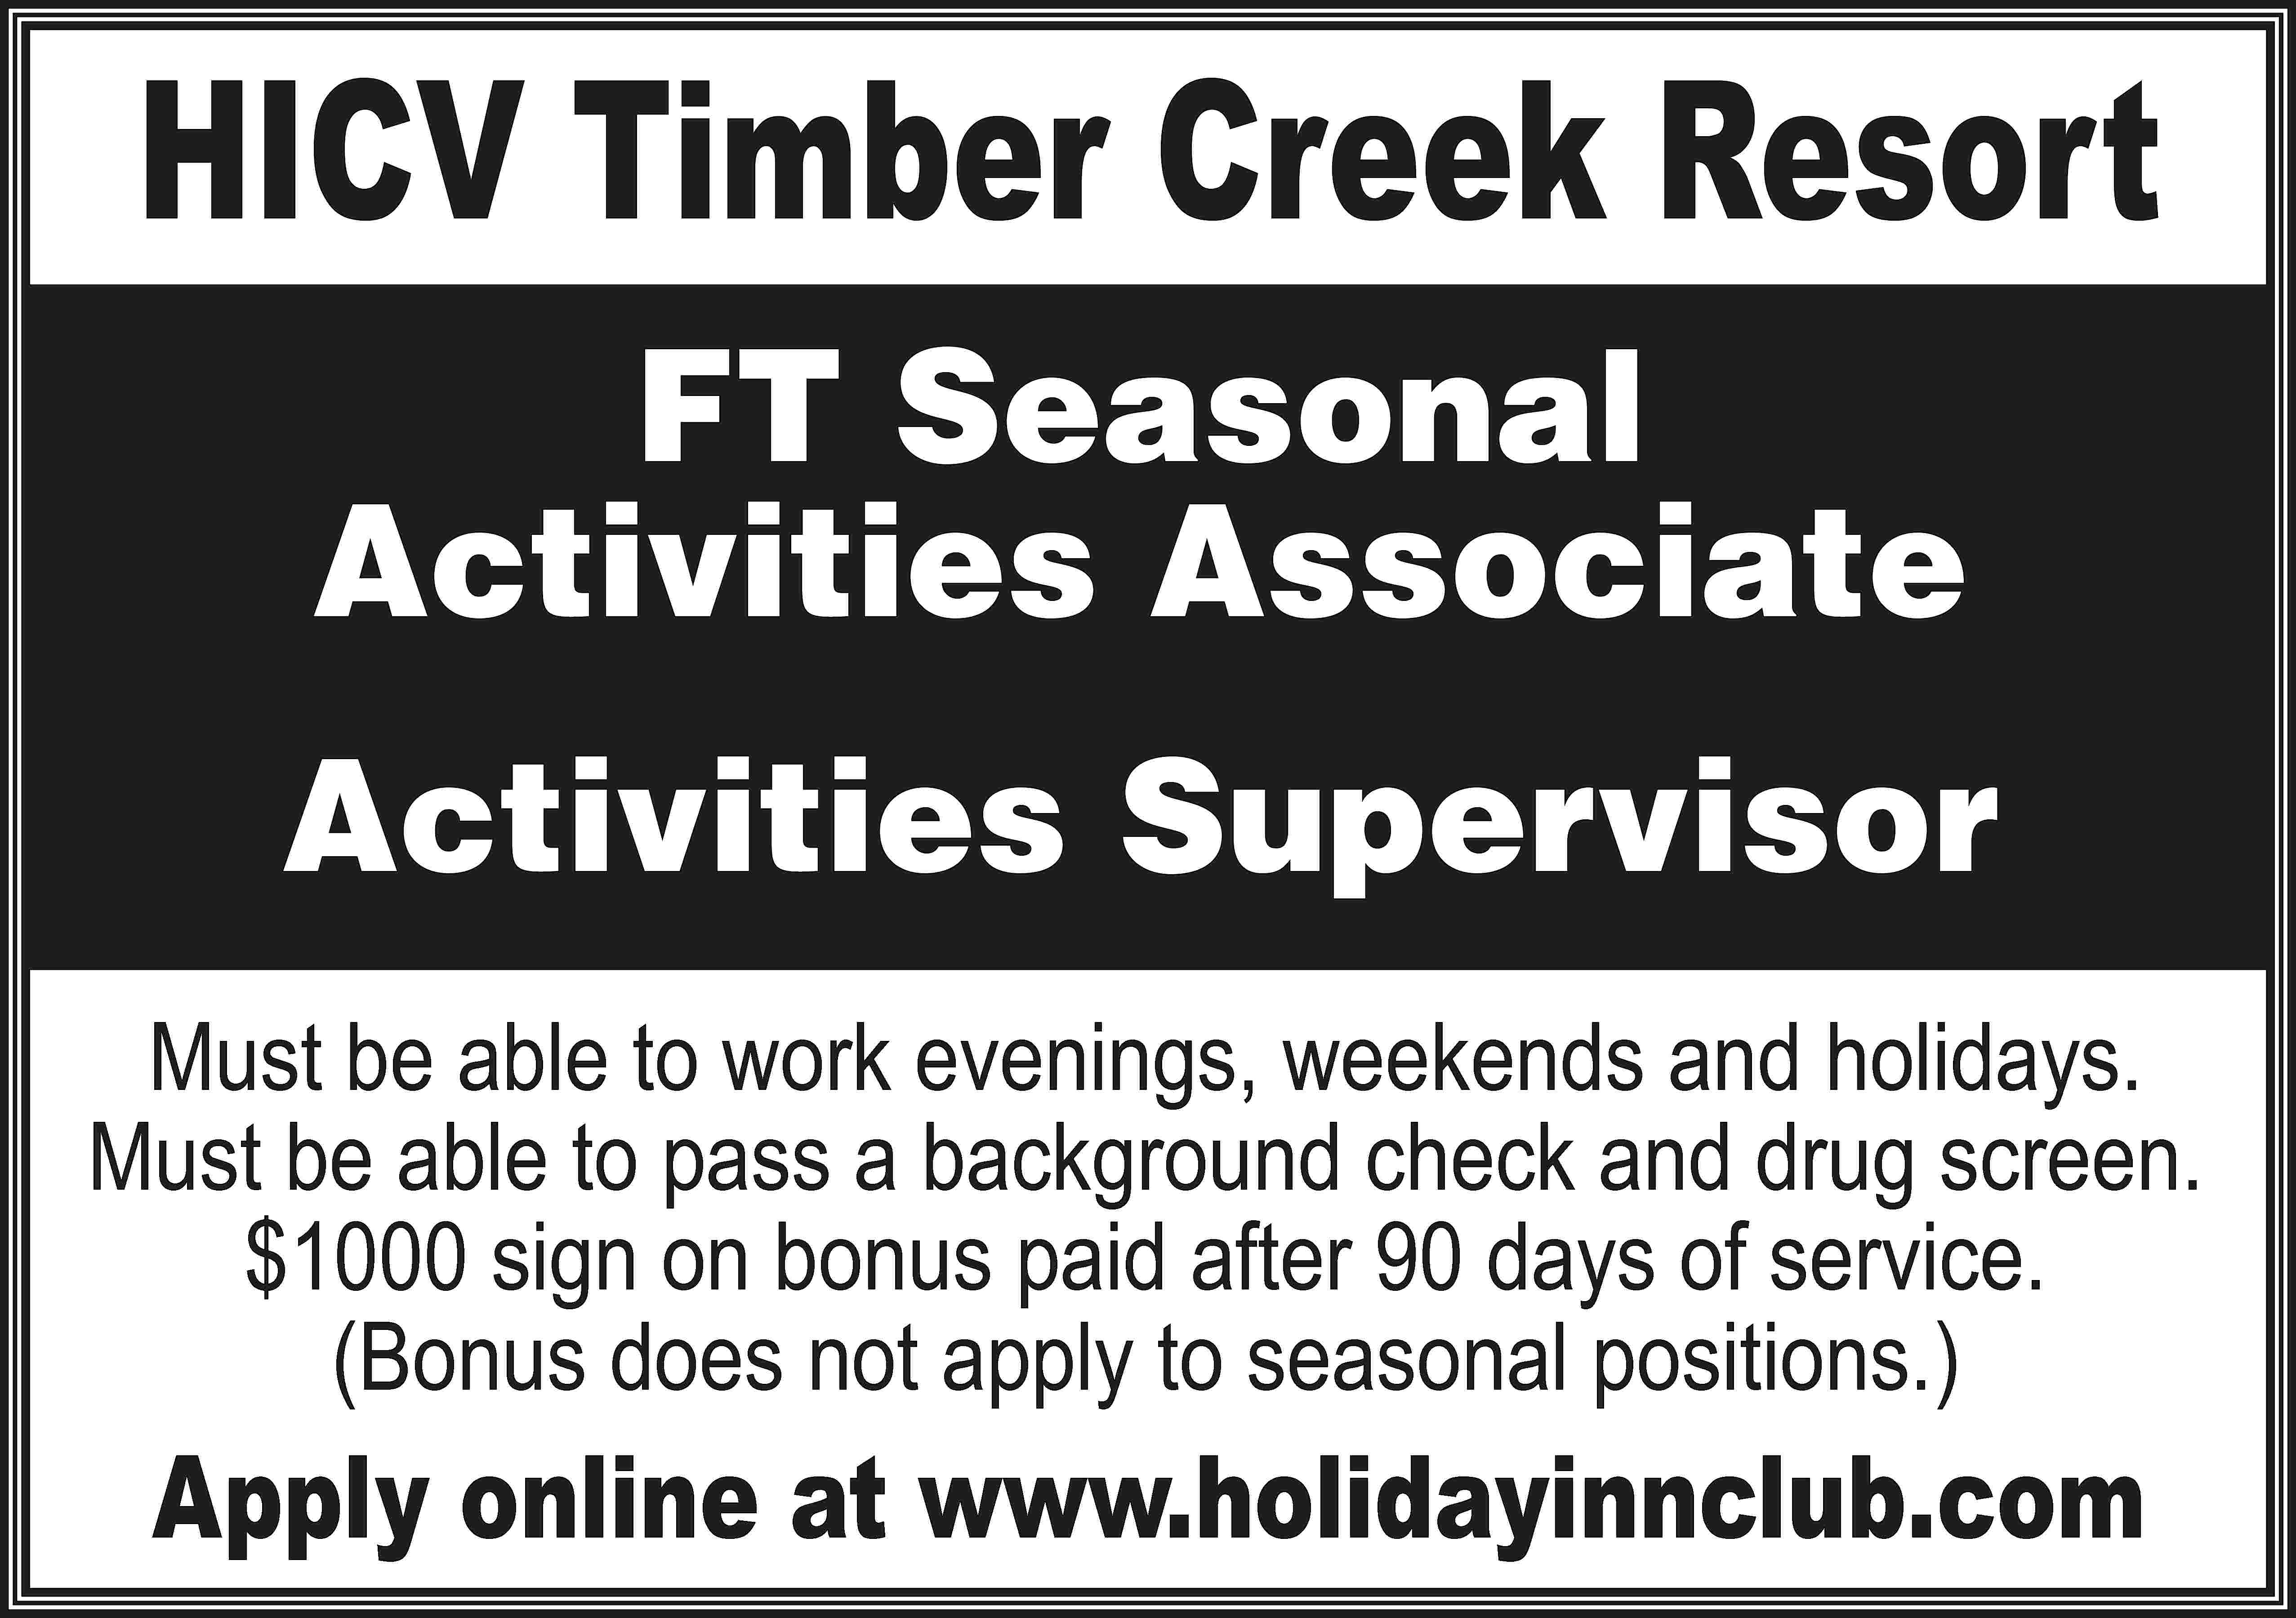 HICV Timber Creek Resort FT  HICV Timber Creek Resort FT Seasonal Activities Associate Activities Supervisor Must be able to work evenings, weekends and holidays. Must be able to pass a background check and drug screen. $1000 sign on bonus paid after 90 days of service. (Bonus does not apply to seasonal positions.) Apply online at www.holidayinnclub.com